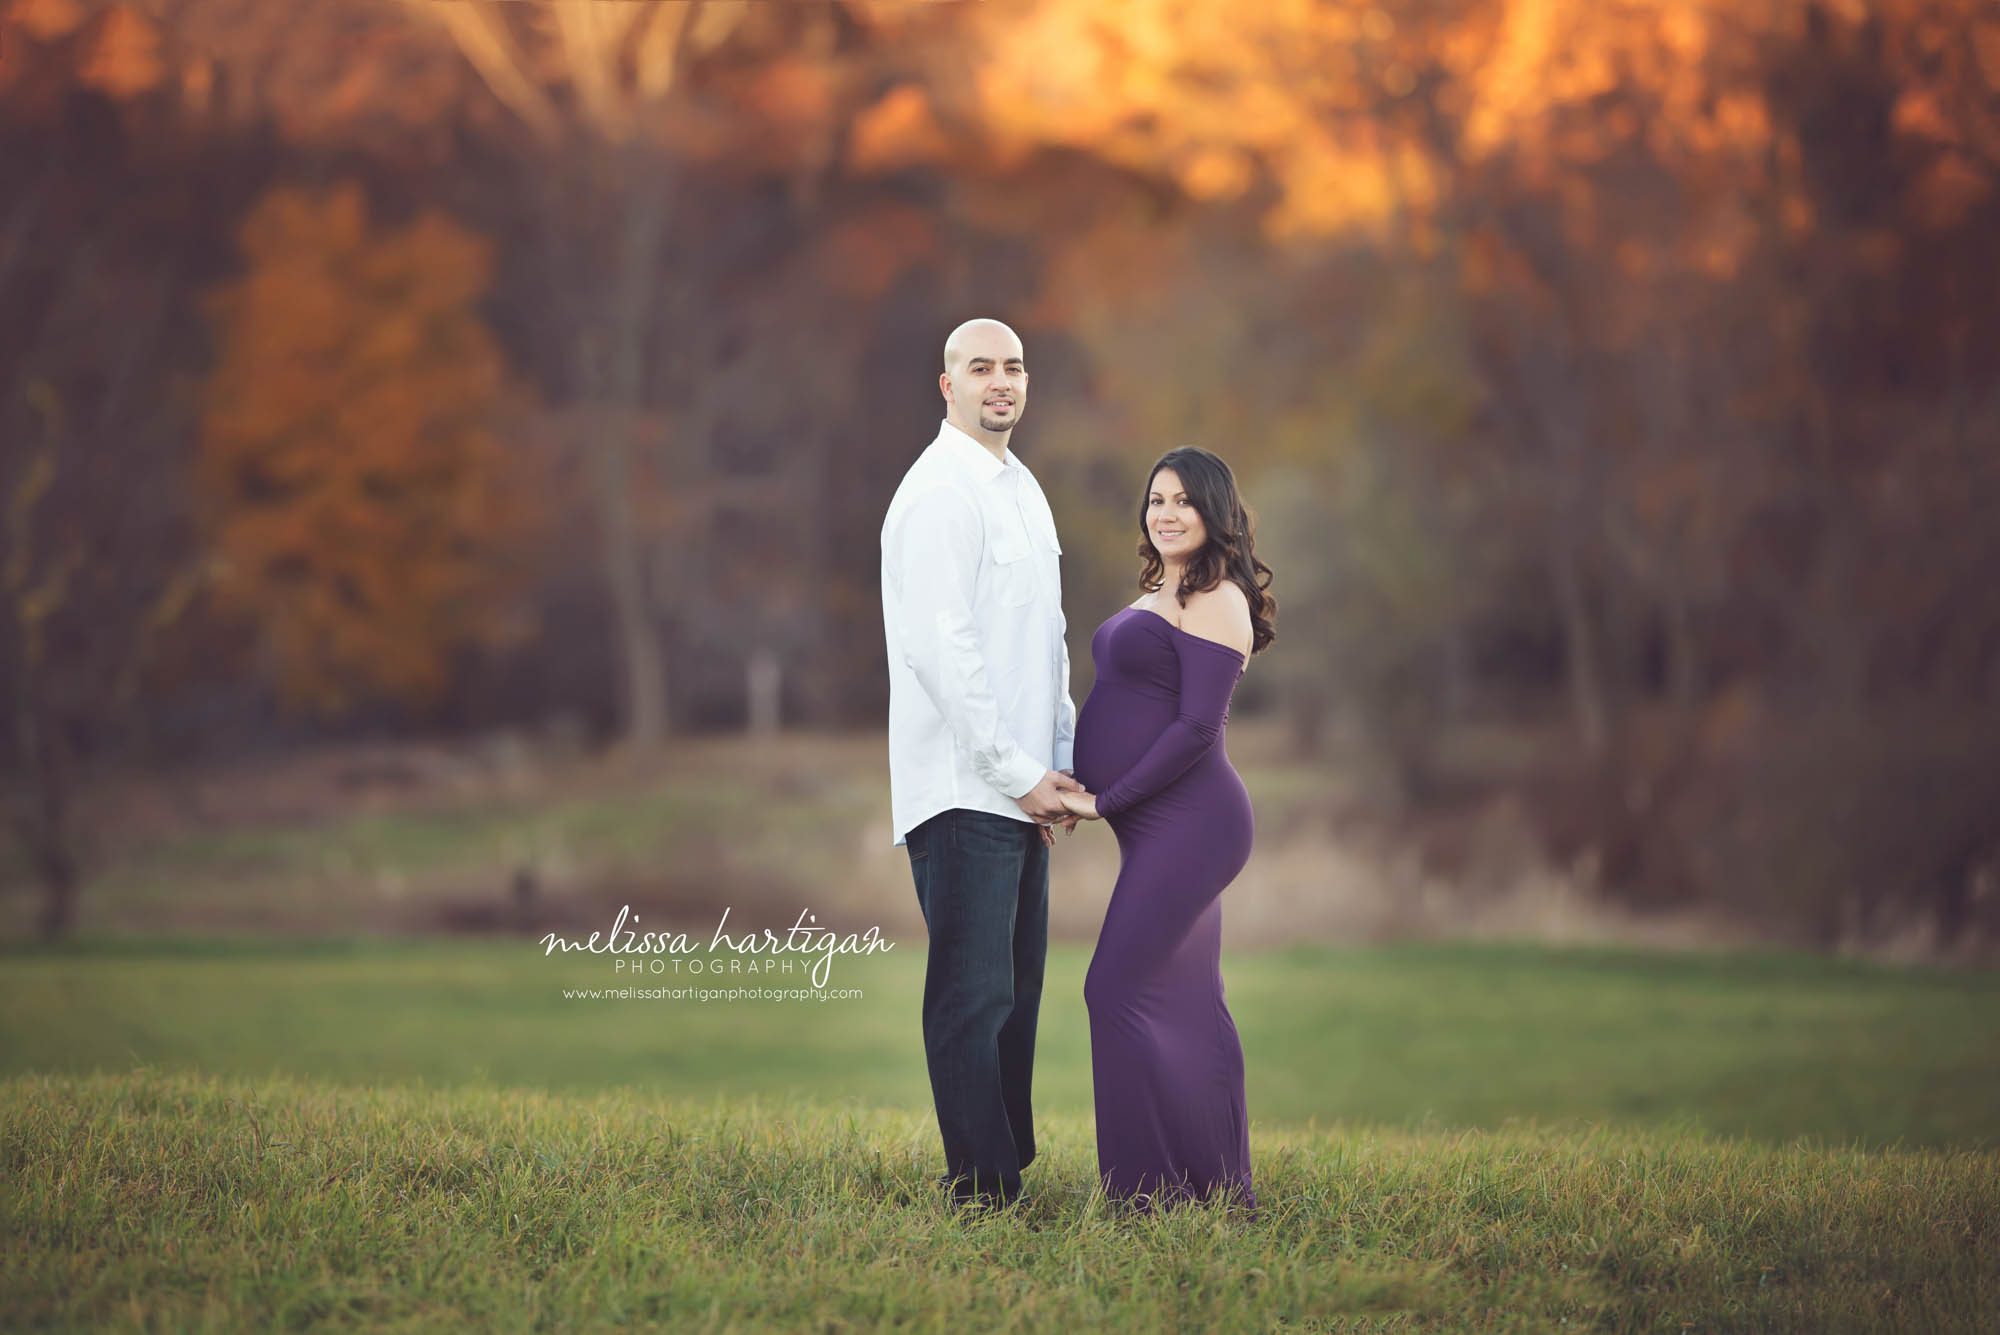 Melissa Hartigan Photography Connecticut Best Maternity Photographer in CT Coventry CT Middlefield CT Fairfield County Newborn and Maternity CT Photographer Maternity Photographer Parents-to-be outdoor session wearing purple maternity dress holding hands looking over shoulder